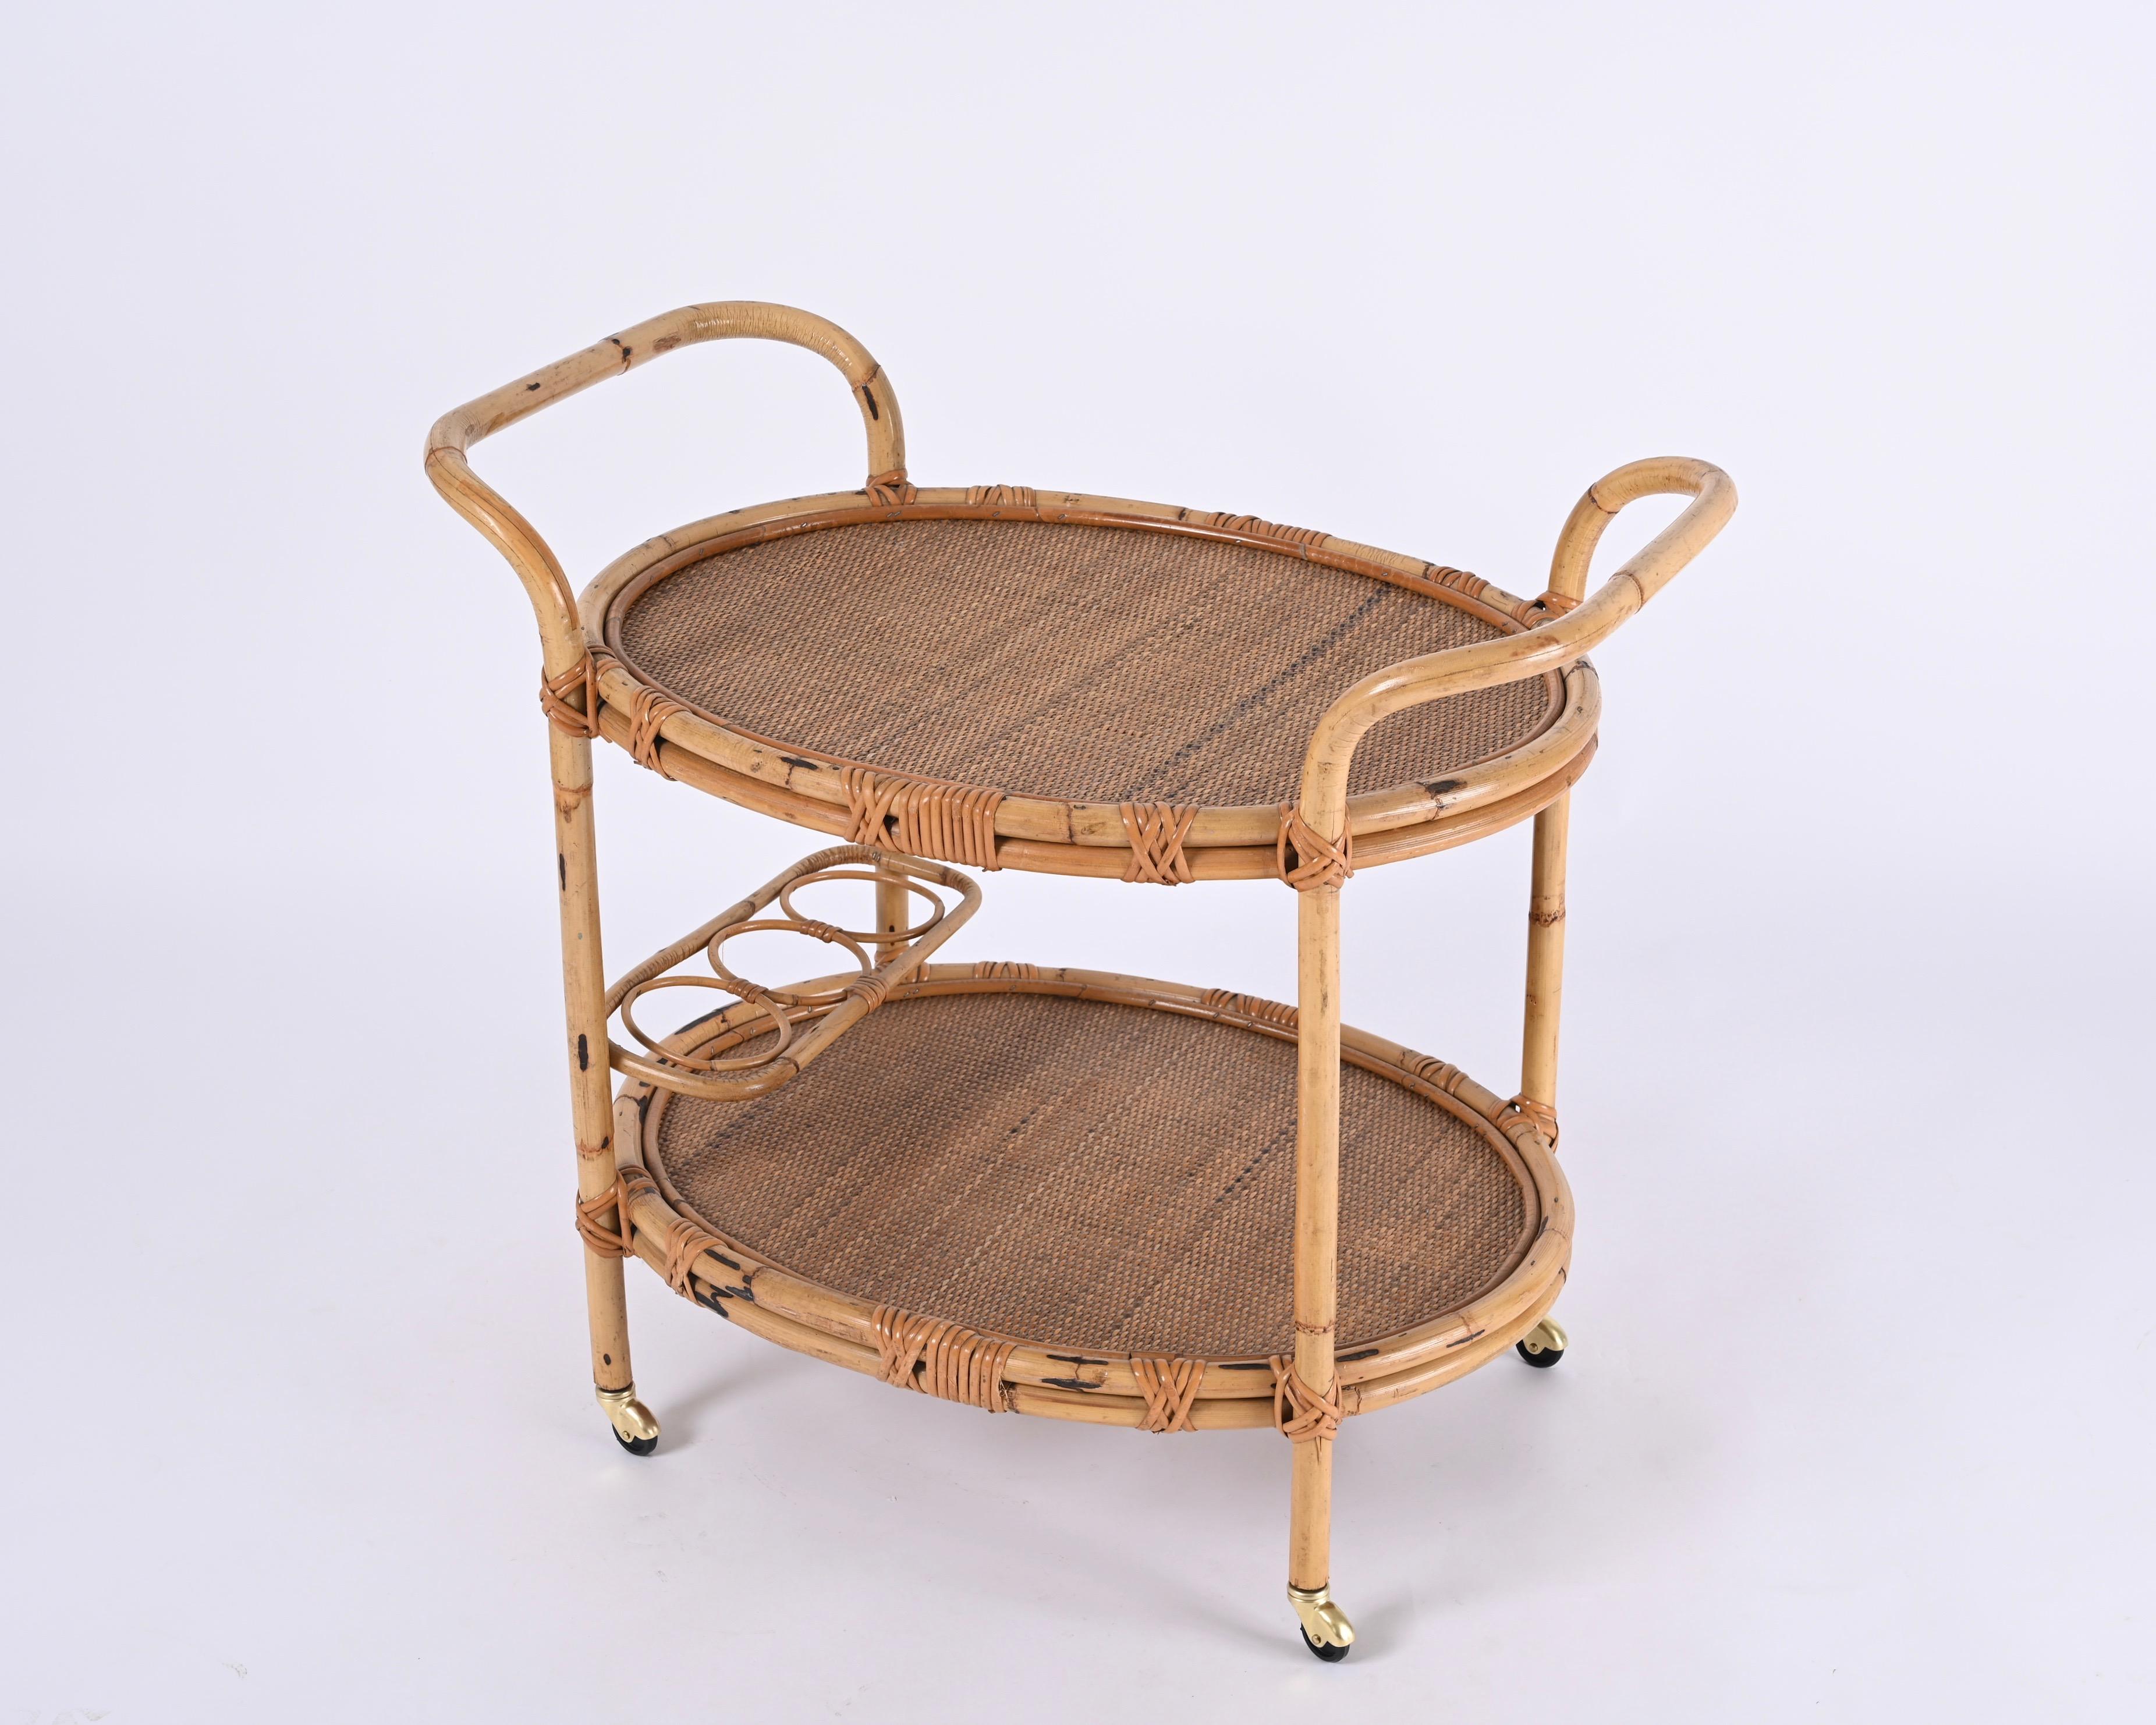 Hand-Woven Midcentury Bamboo and Rattan Italian Oval Serving Bar Cart Trolley, 1960s